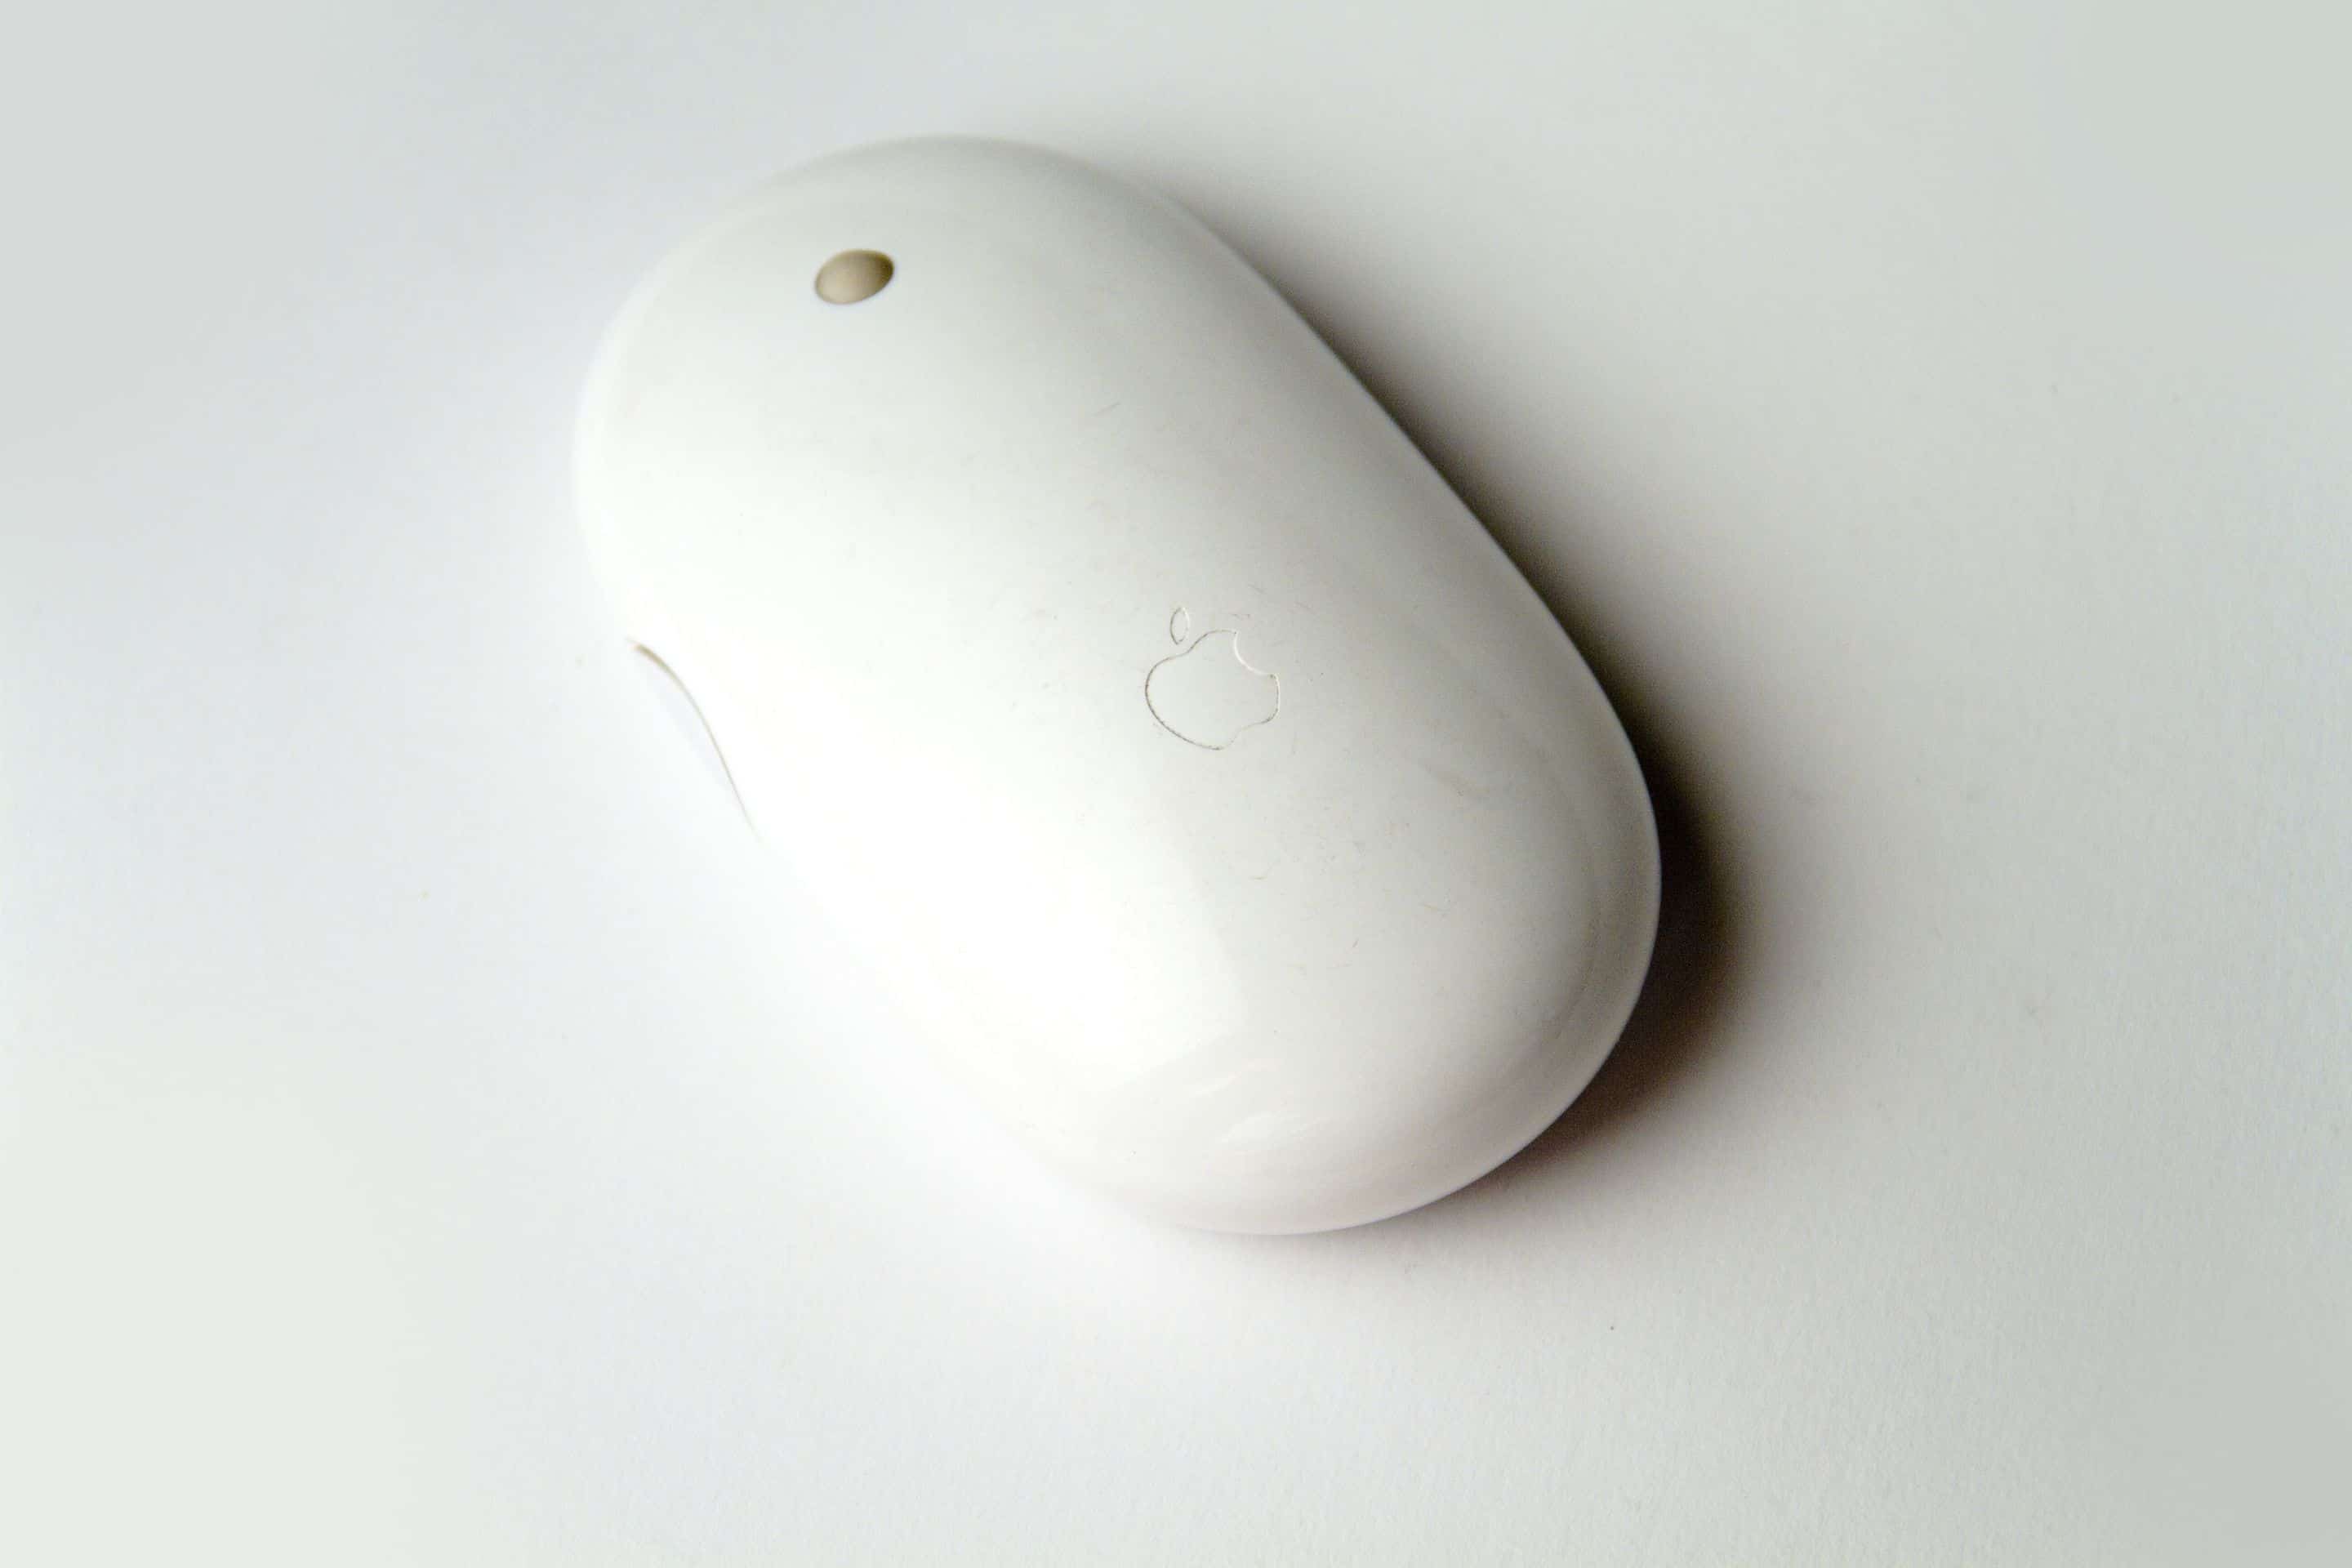 Apple's new Mighty Mouse also added laser tracking.